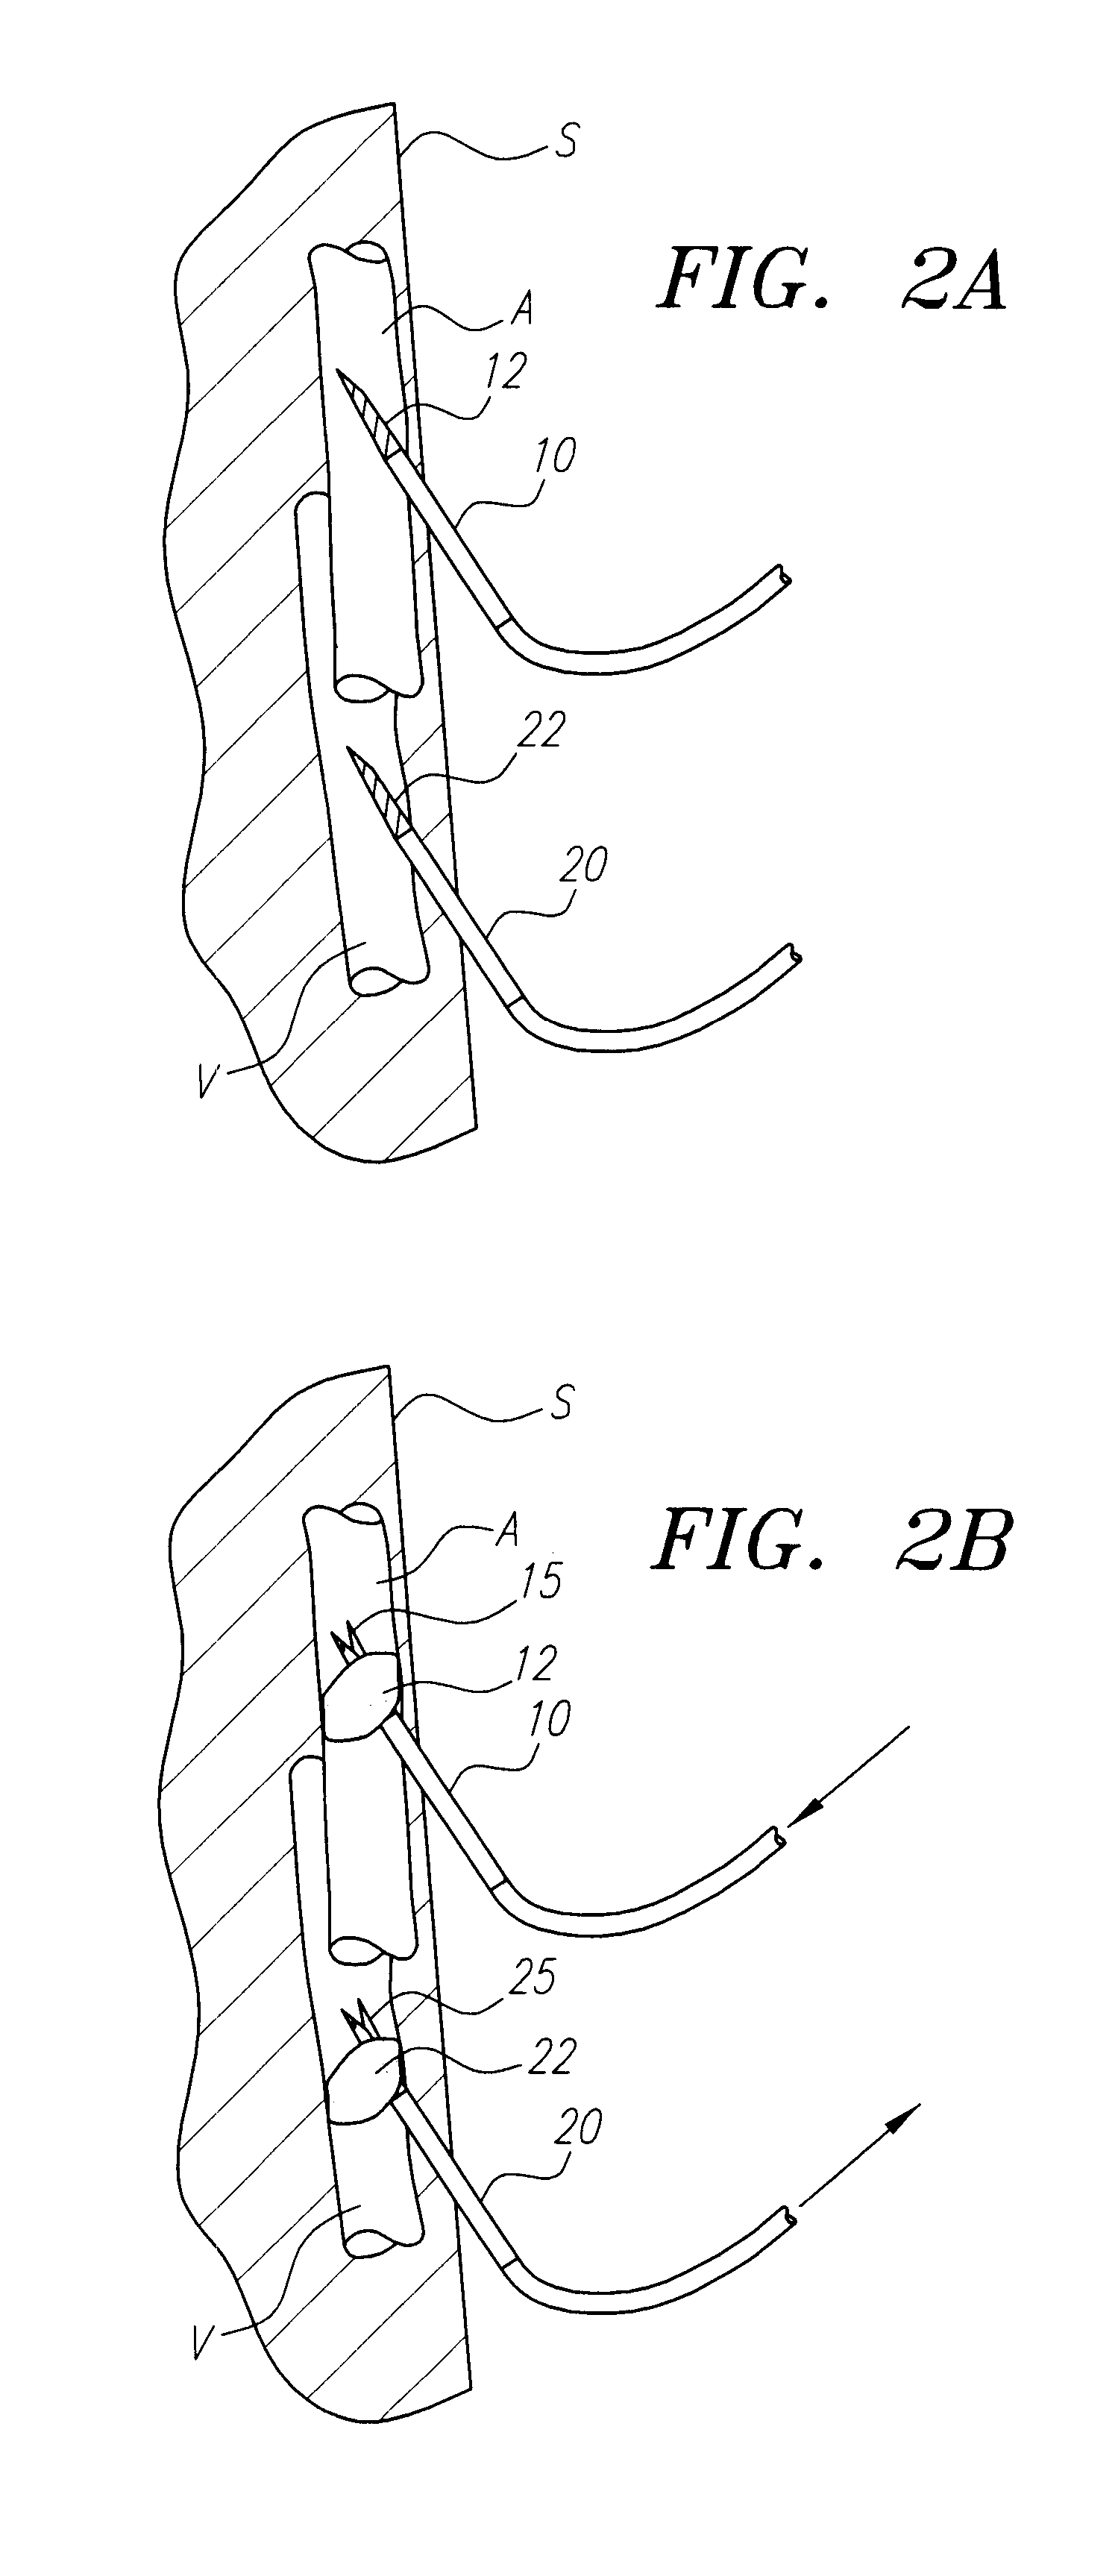 Intravascular methods and apparatus for isolation and selective cooling of the cerebral vasculature during surgical procedures